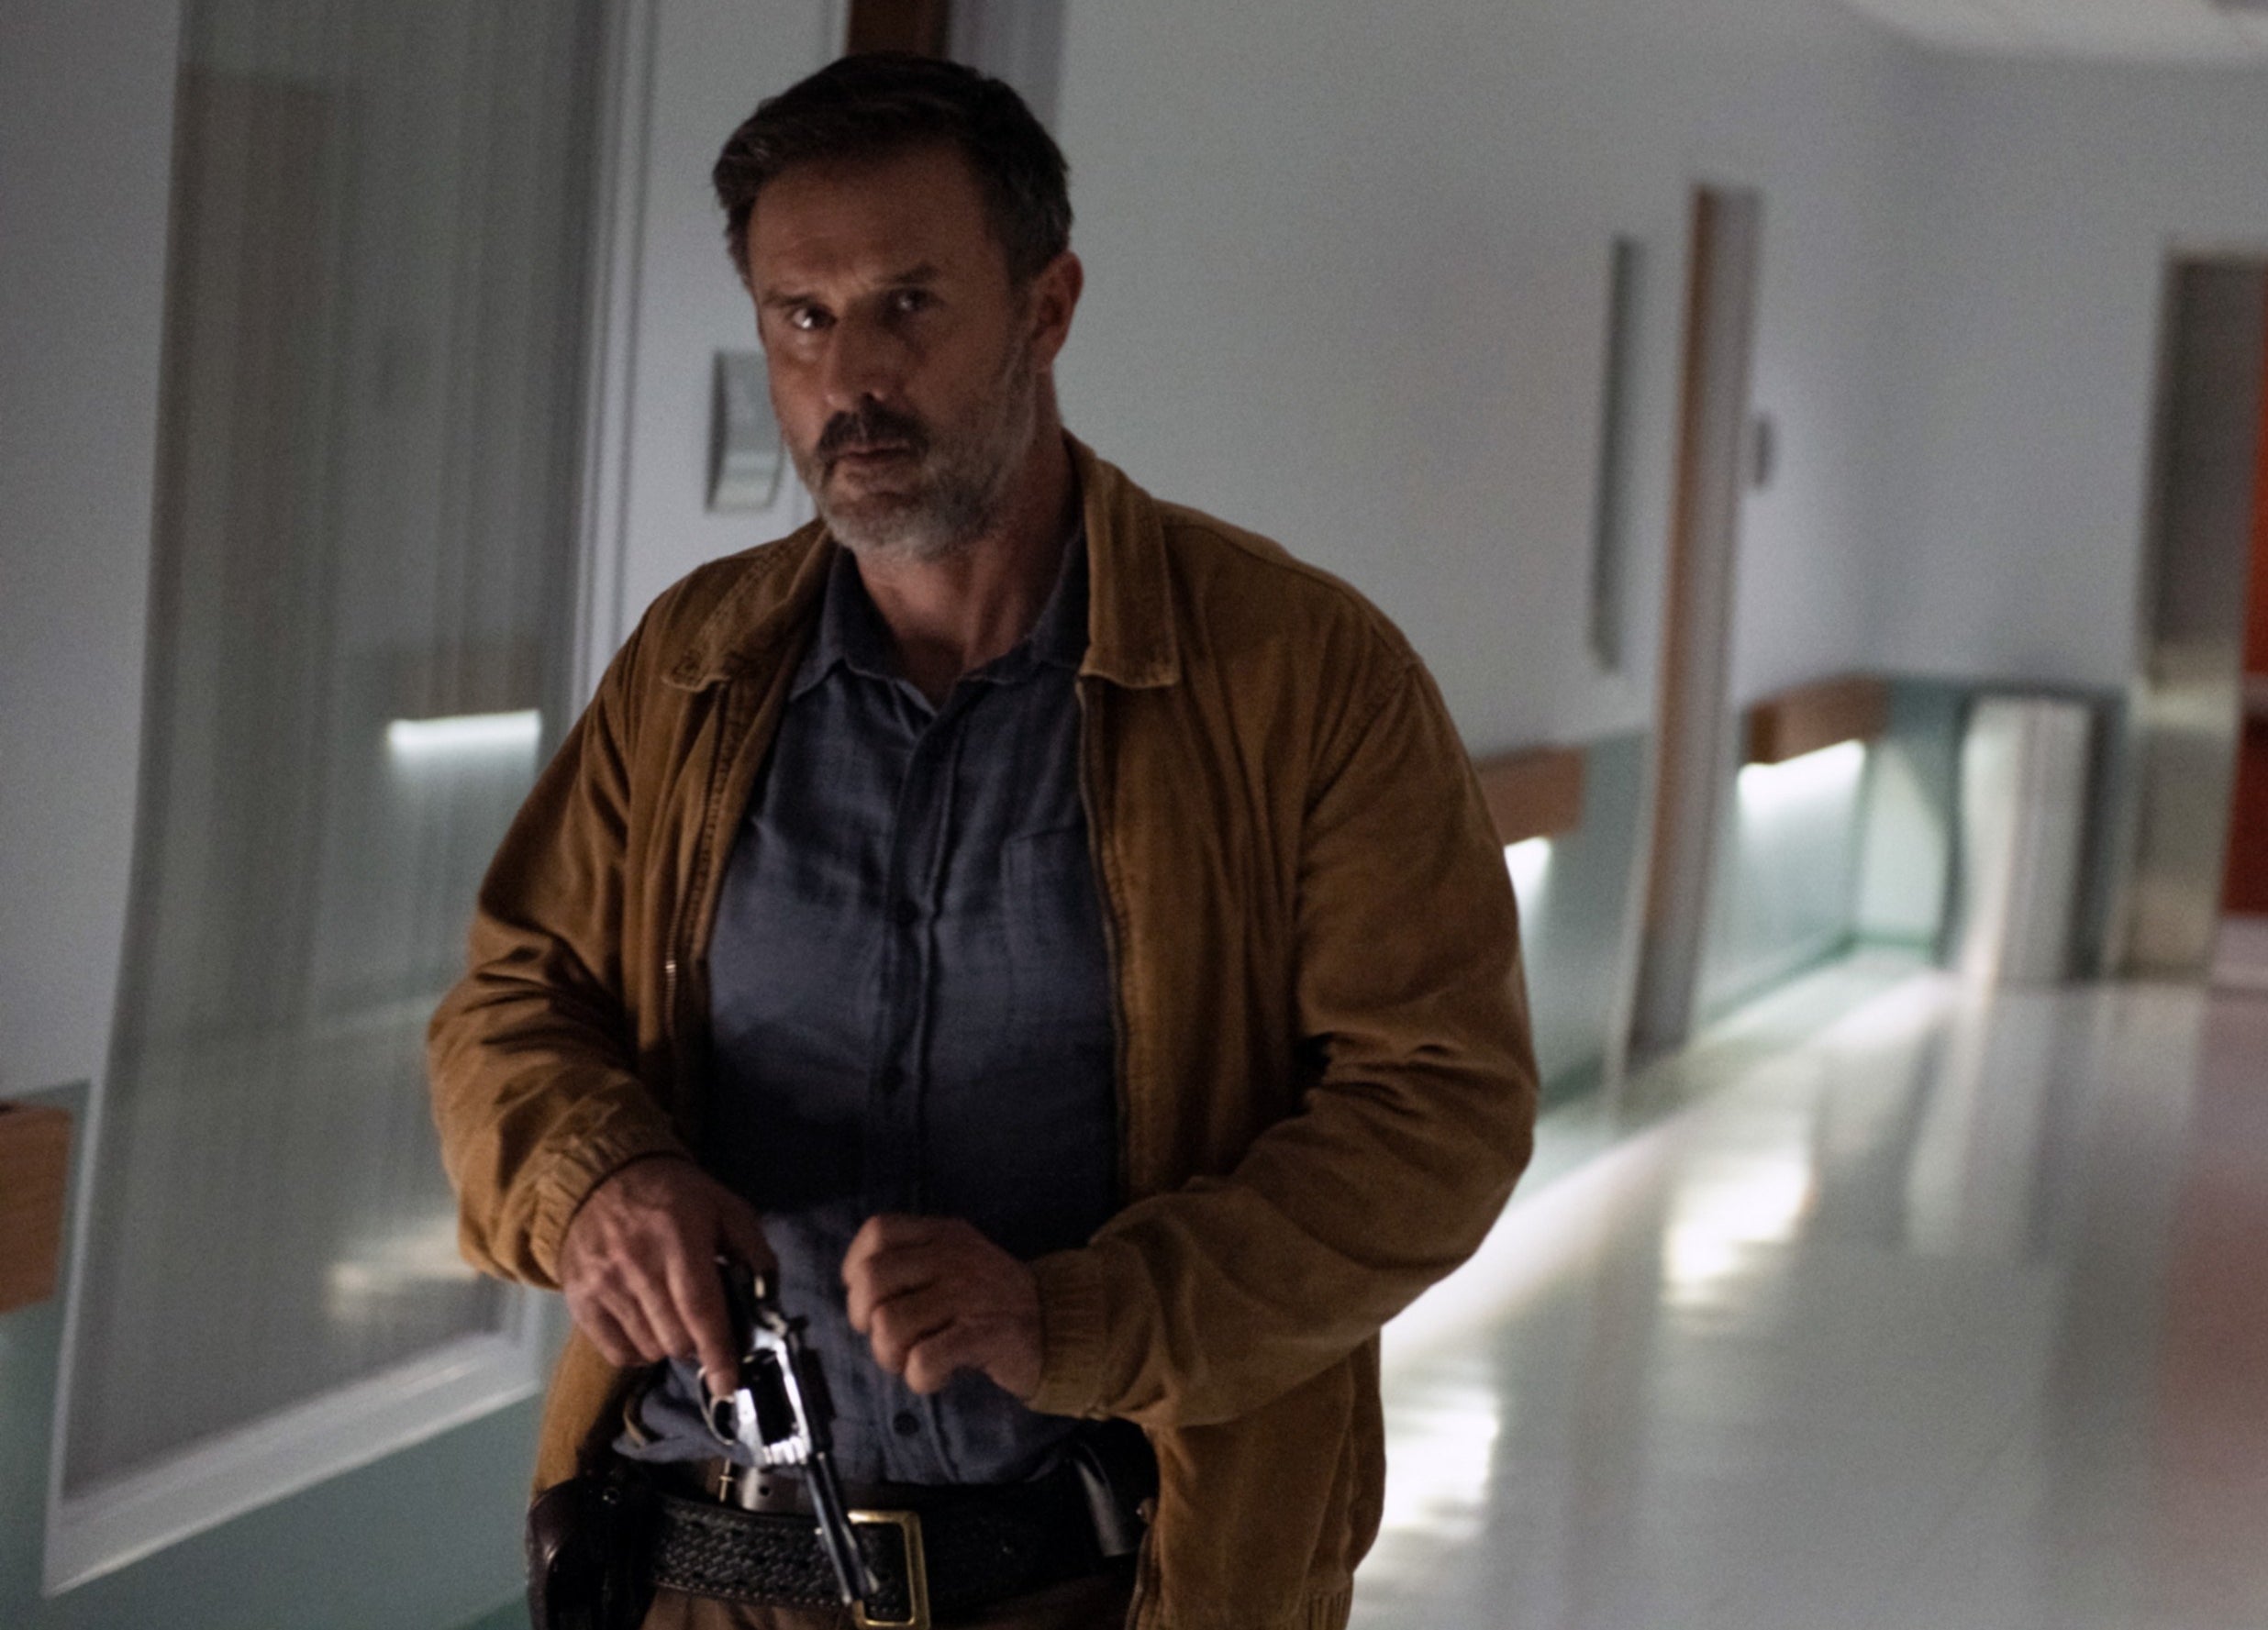 Dewey entering the hospital wielding a gun while in plains clothes